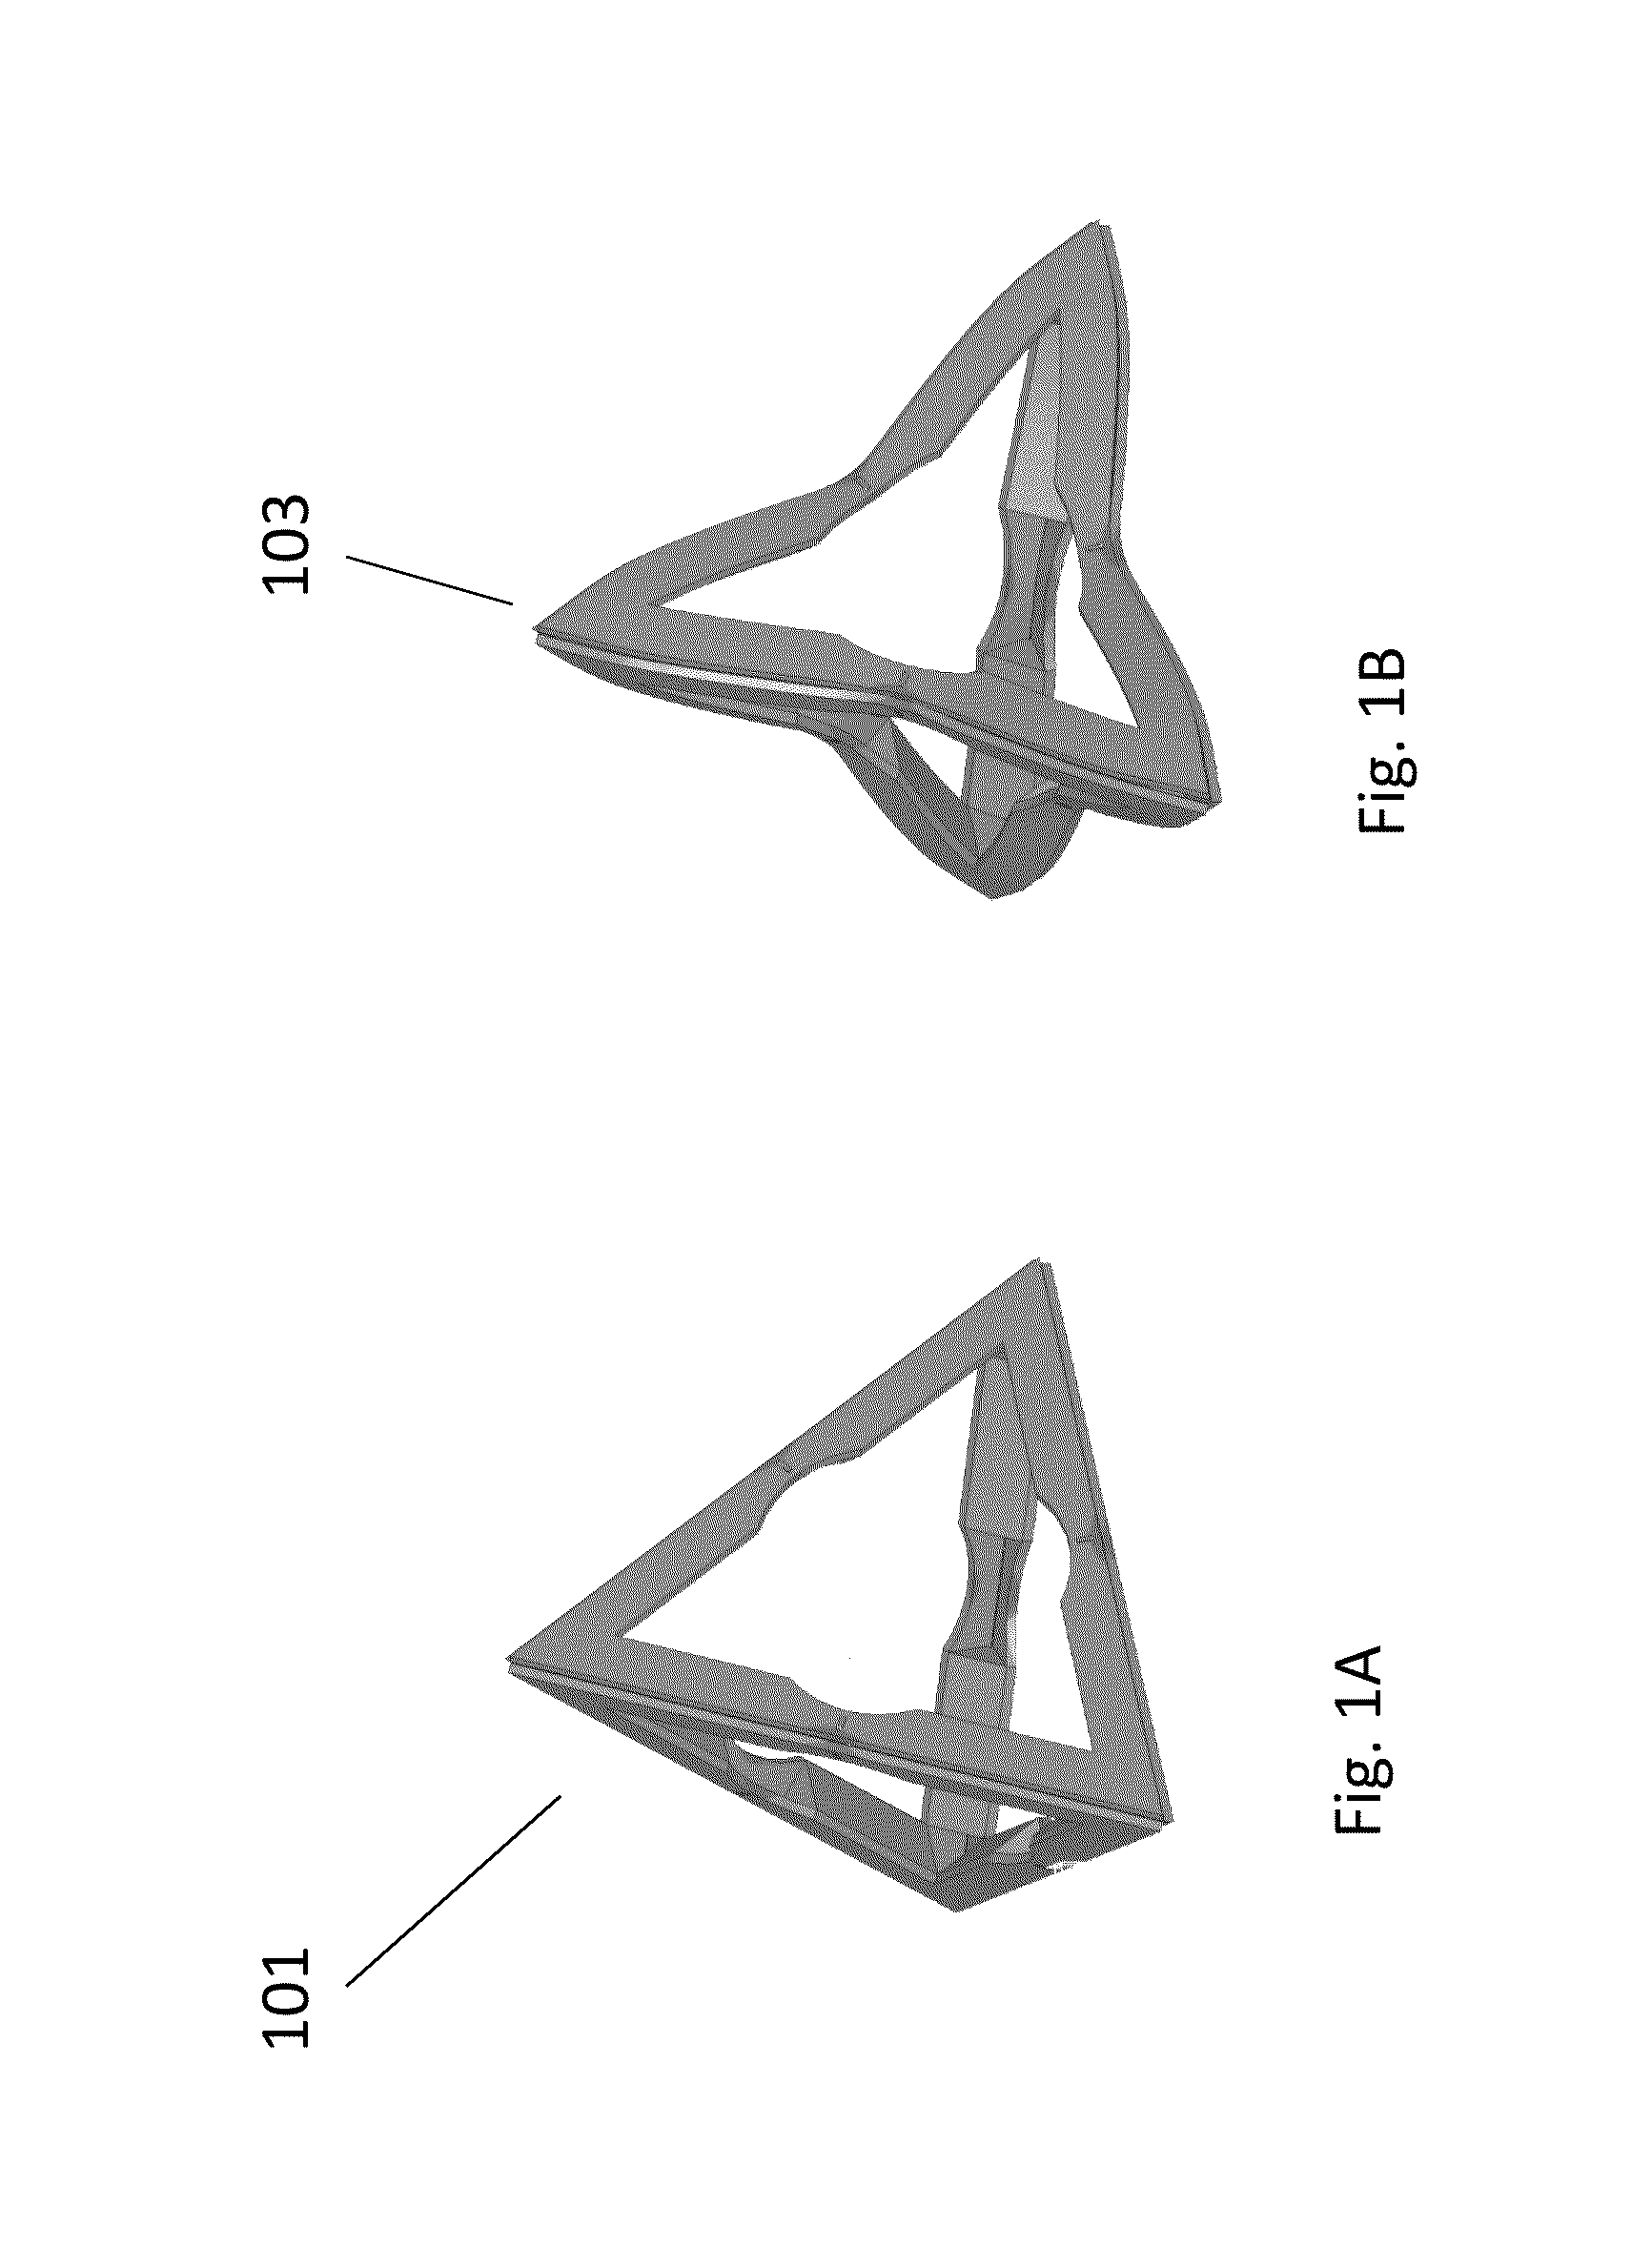 Apparatus and method for sand consolidation